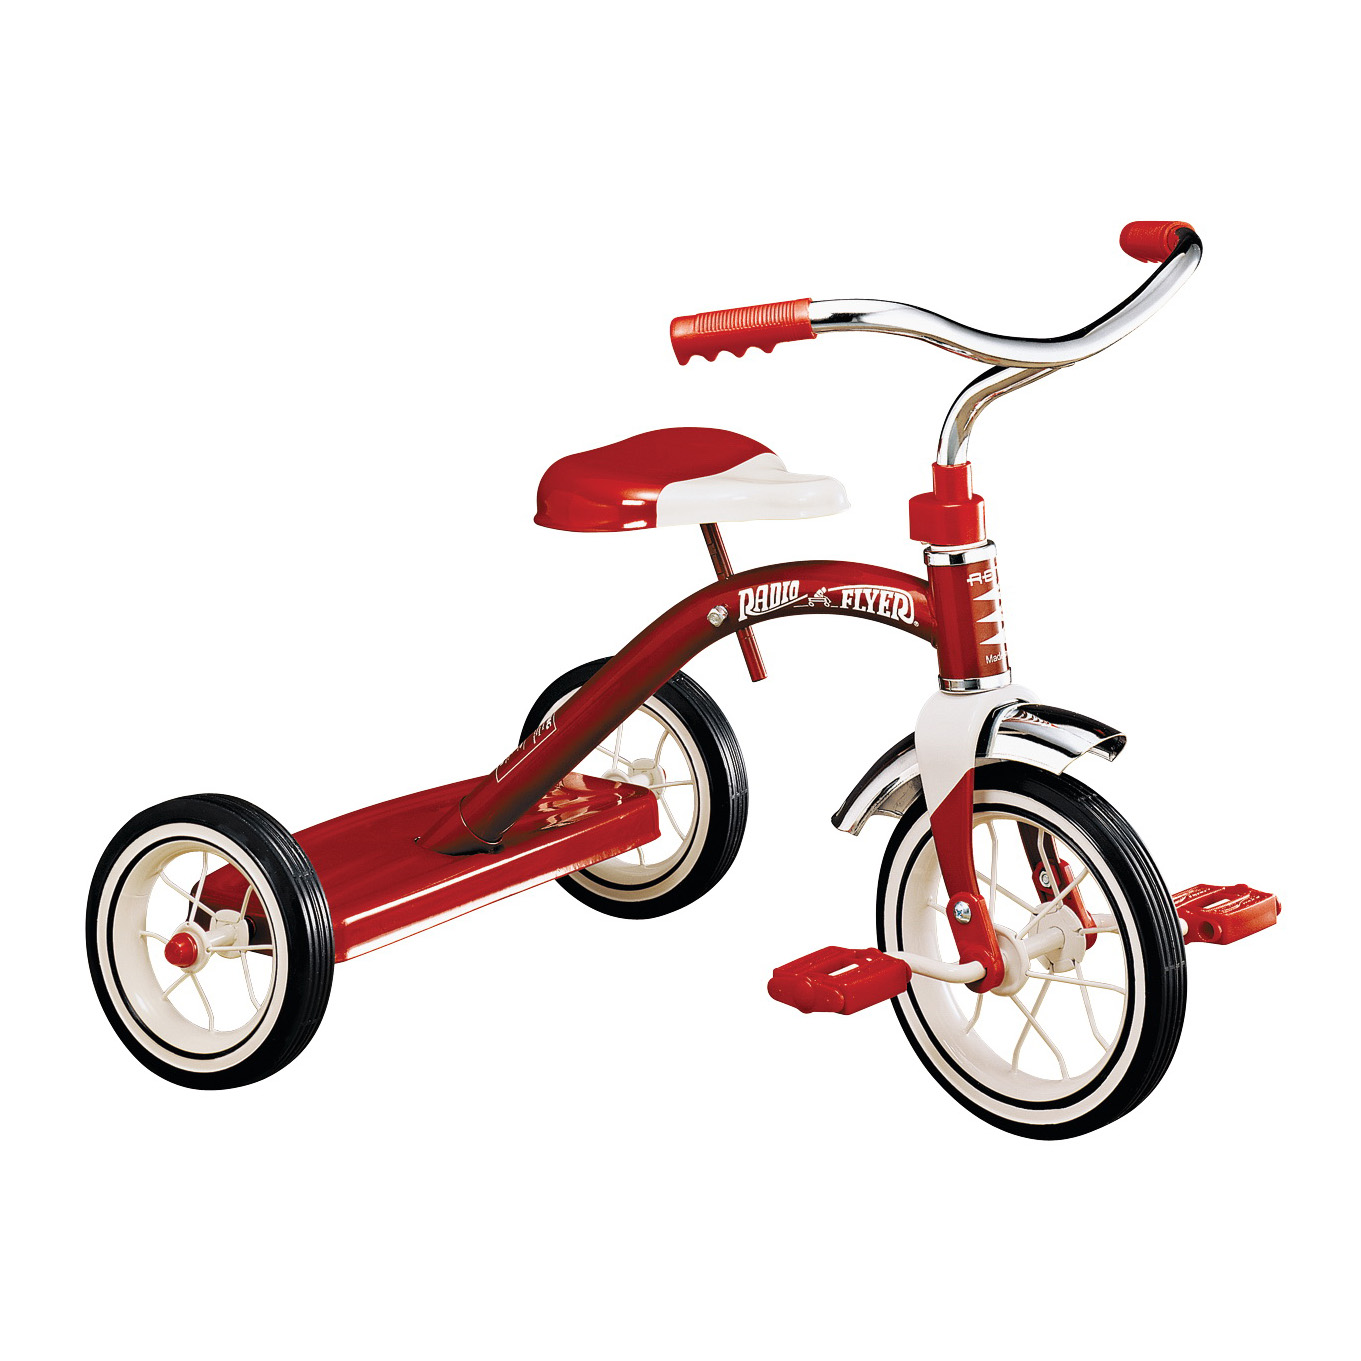 34B Tricycle, 2 to 4 years, Steel Frame, 10 x 1-1/4 in Front Wheel, 7 x 1-1/2 in Rear Wheel, Red